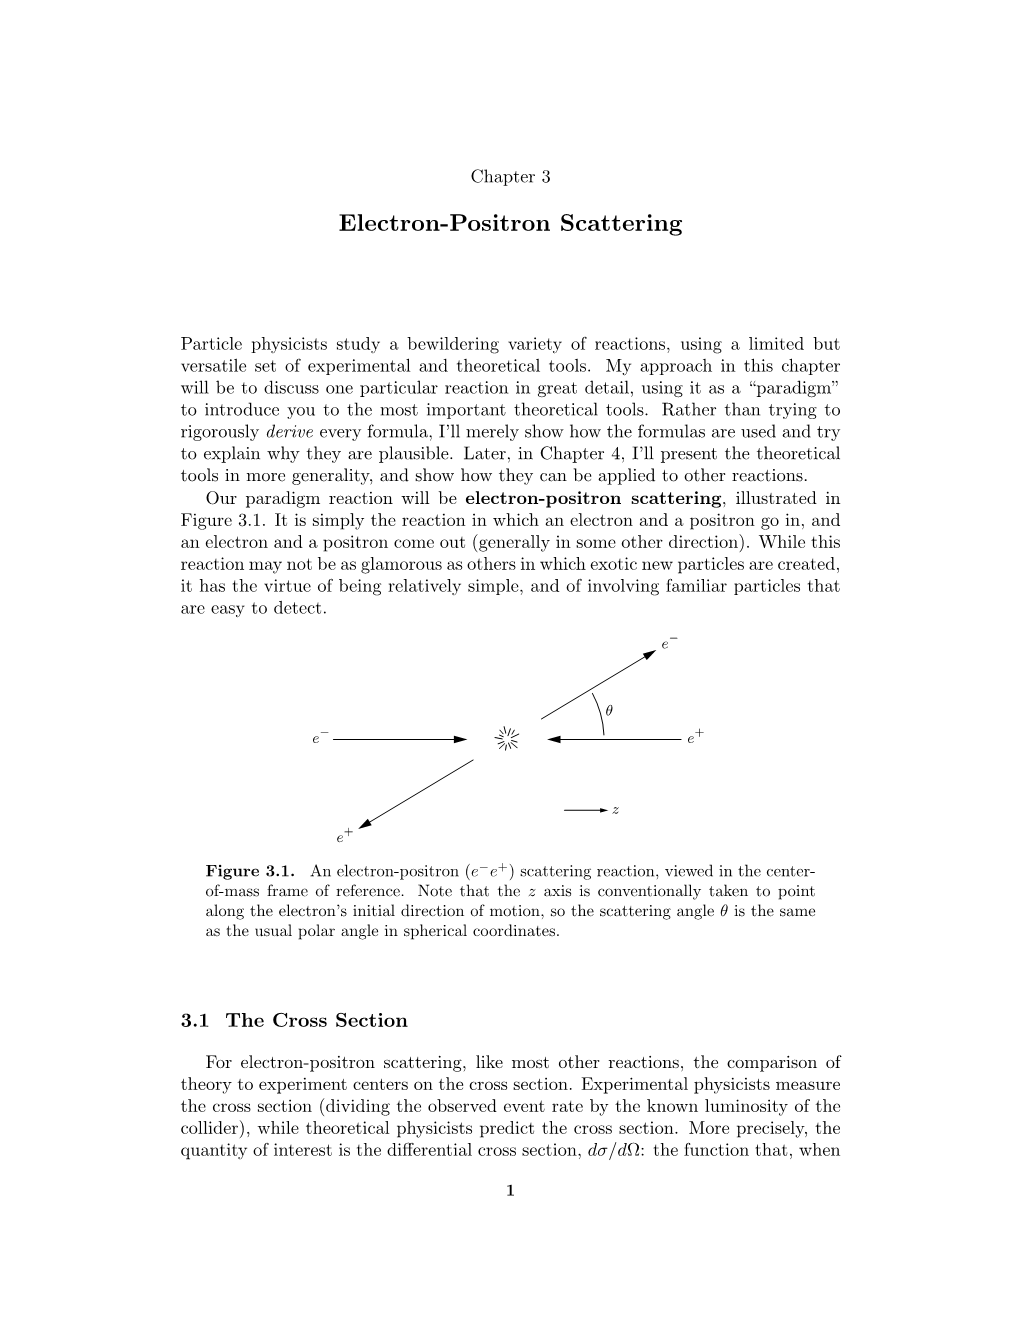 Electron-Positron Scattering